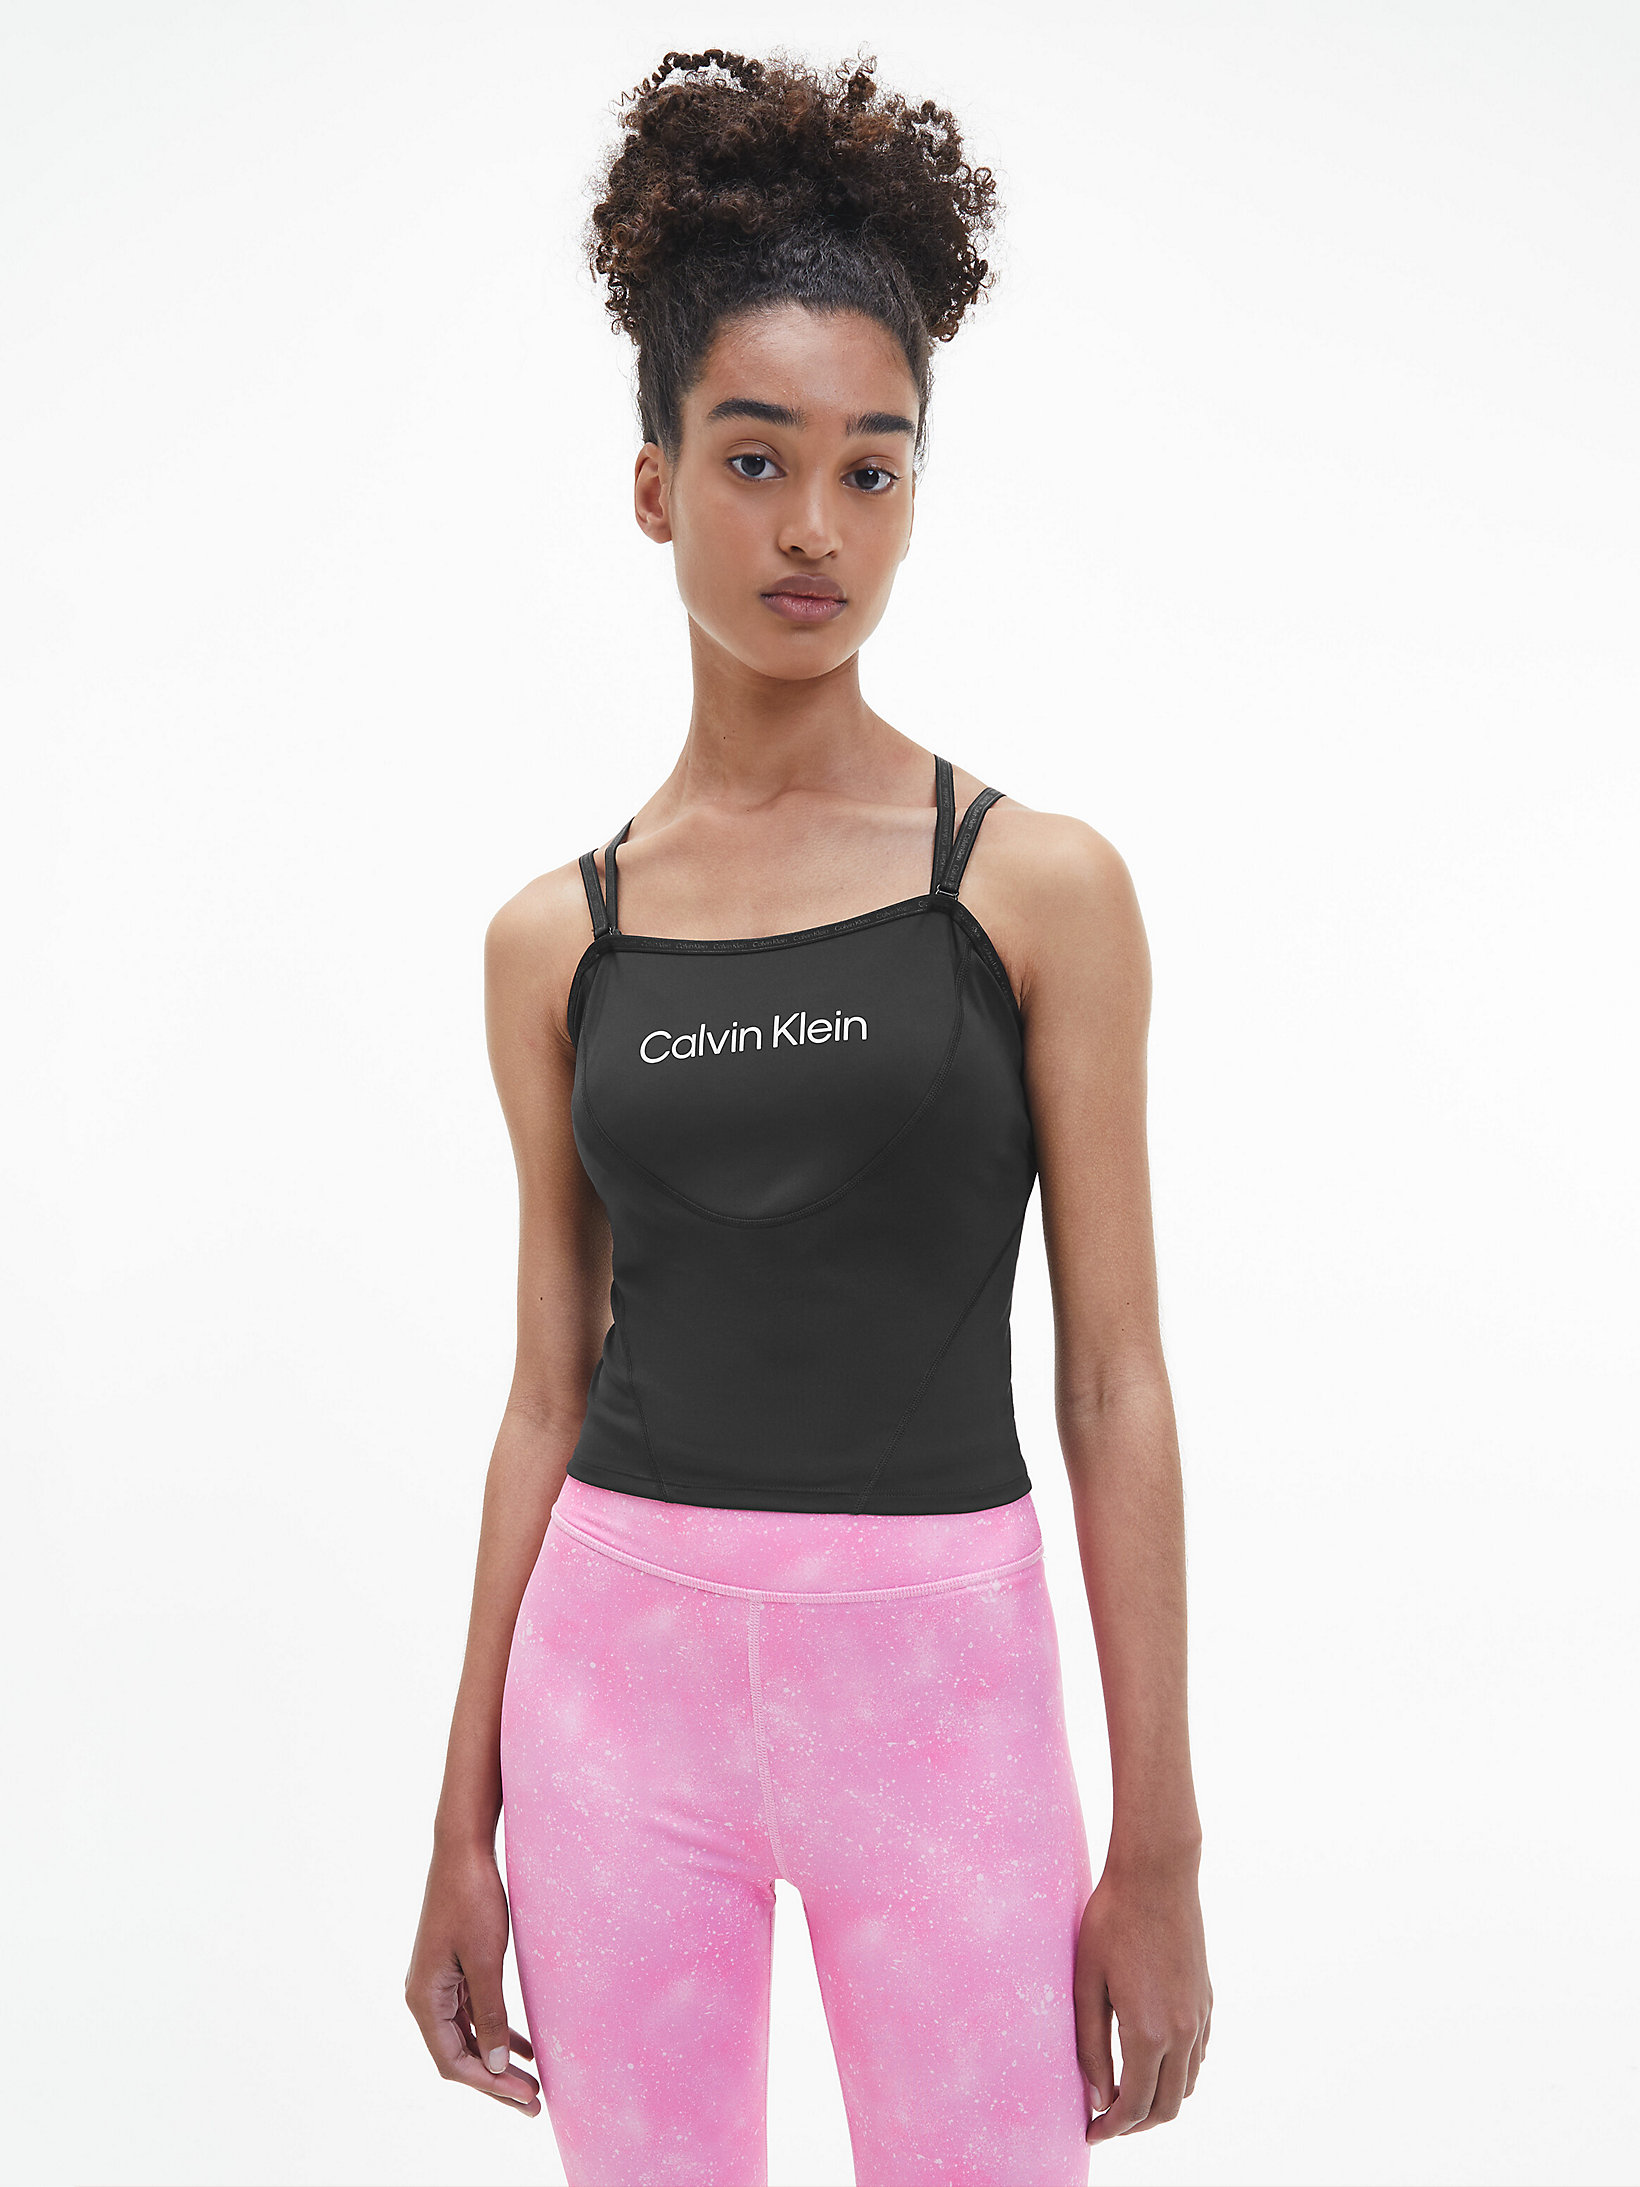 CK Black Recycled Polyester Gym Tank Top undefined women Calvin Klein